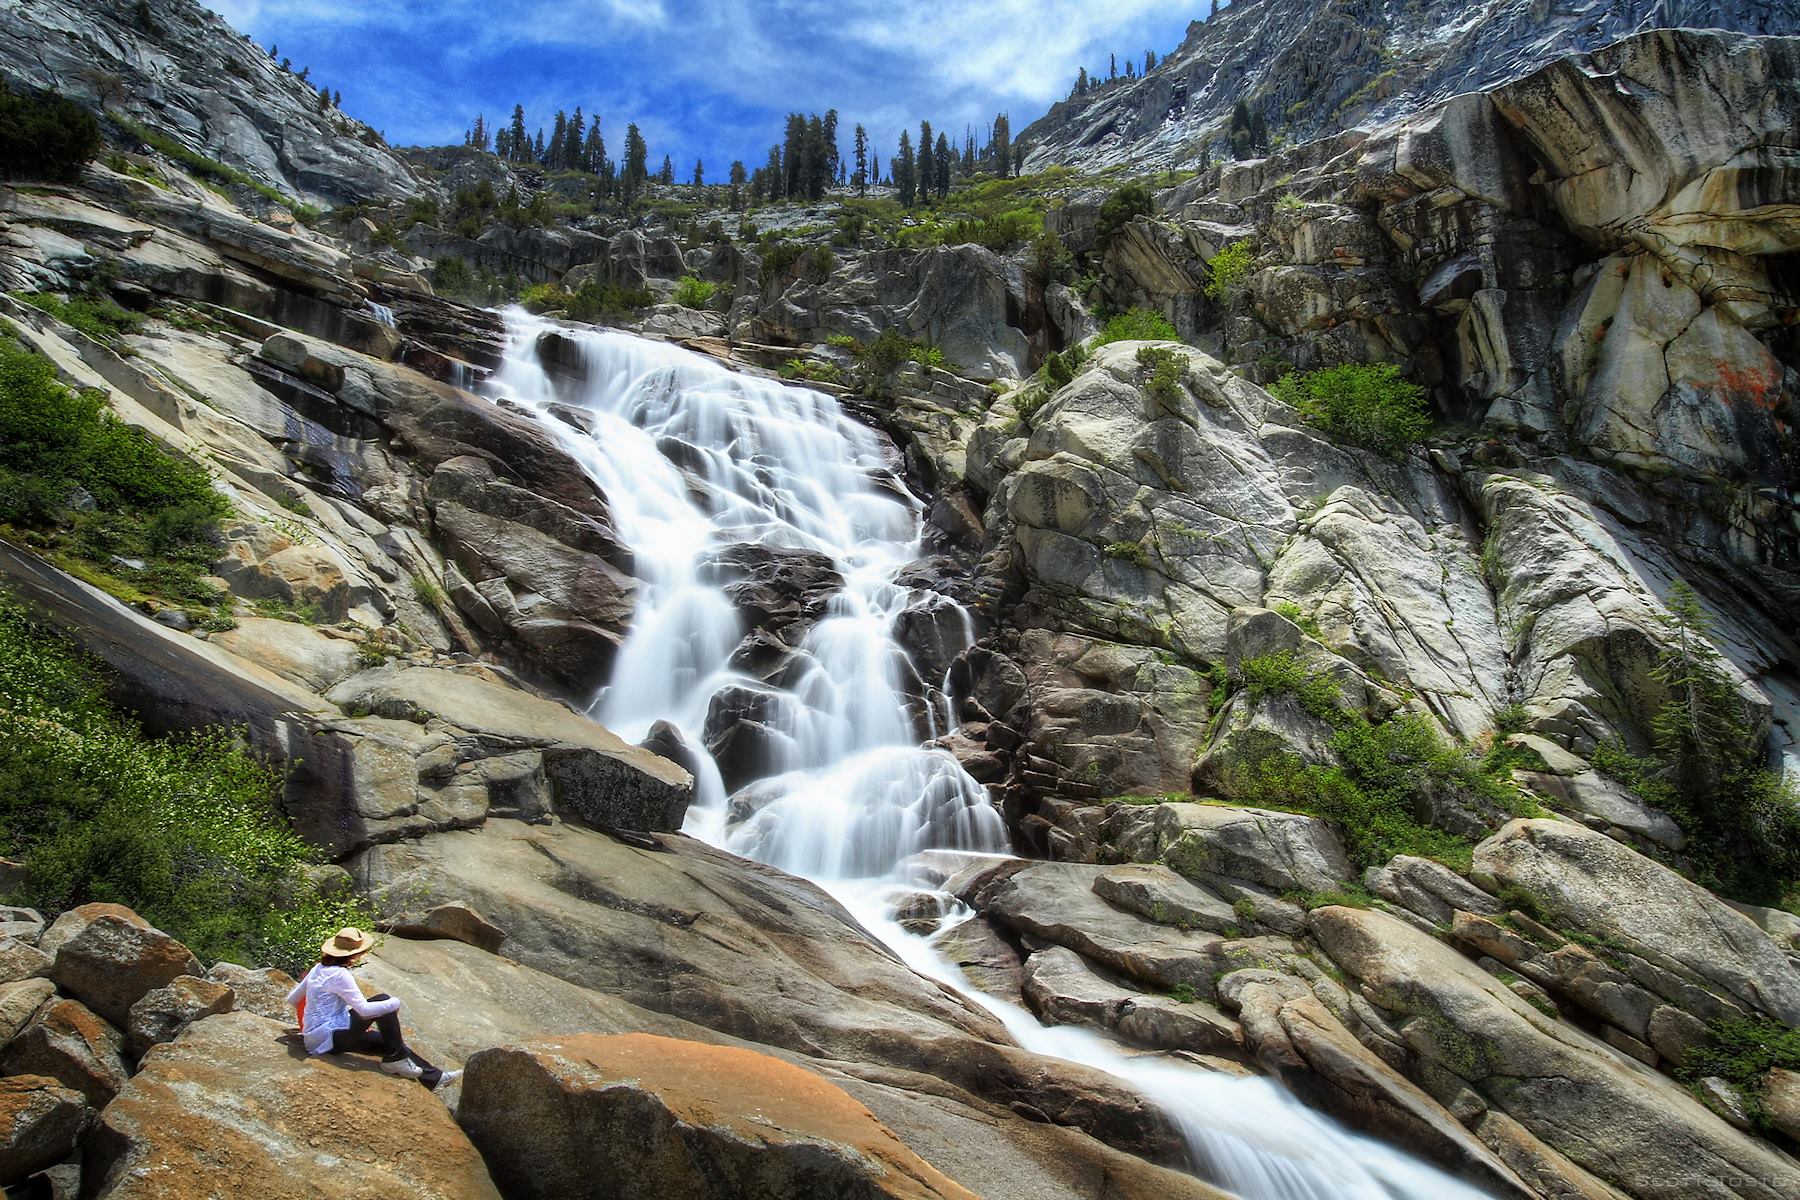 The cascading waterfall of Tokopah Falls comes down a granite stairstep with alpine trees up top and a woman sitting on slickrock below. 